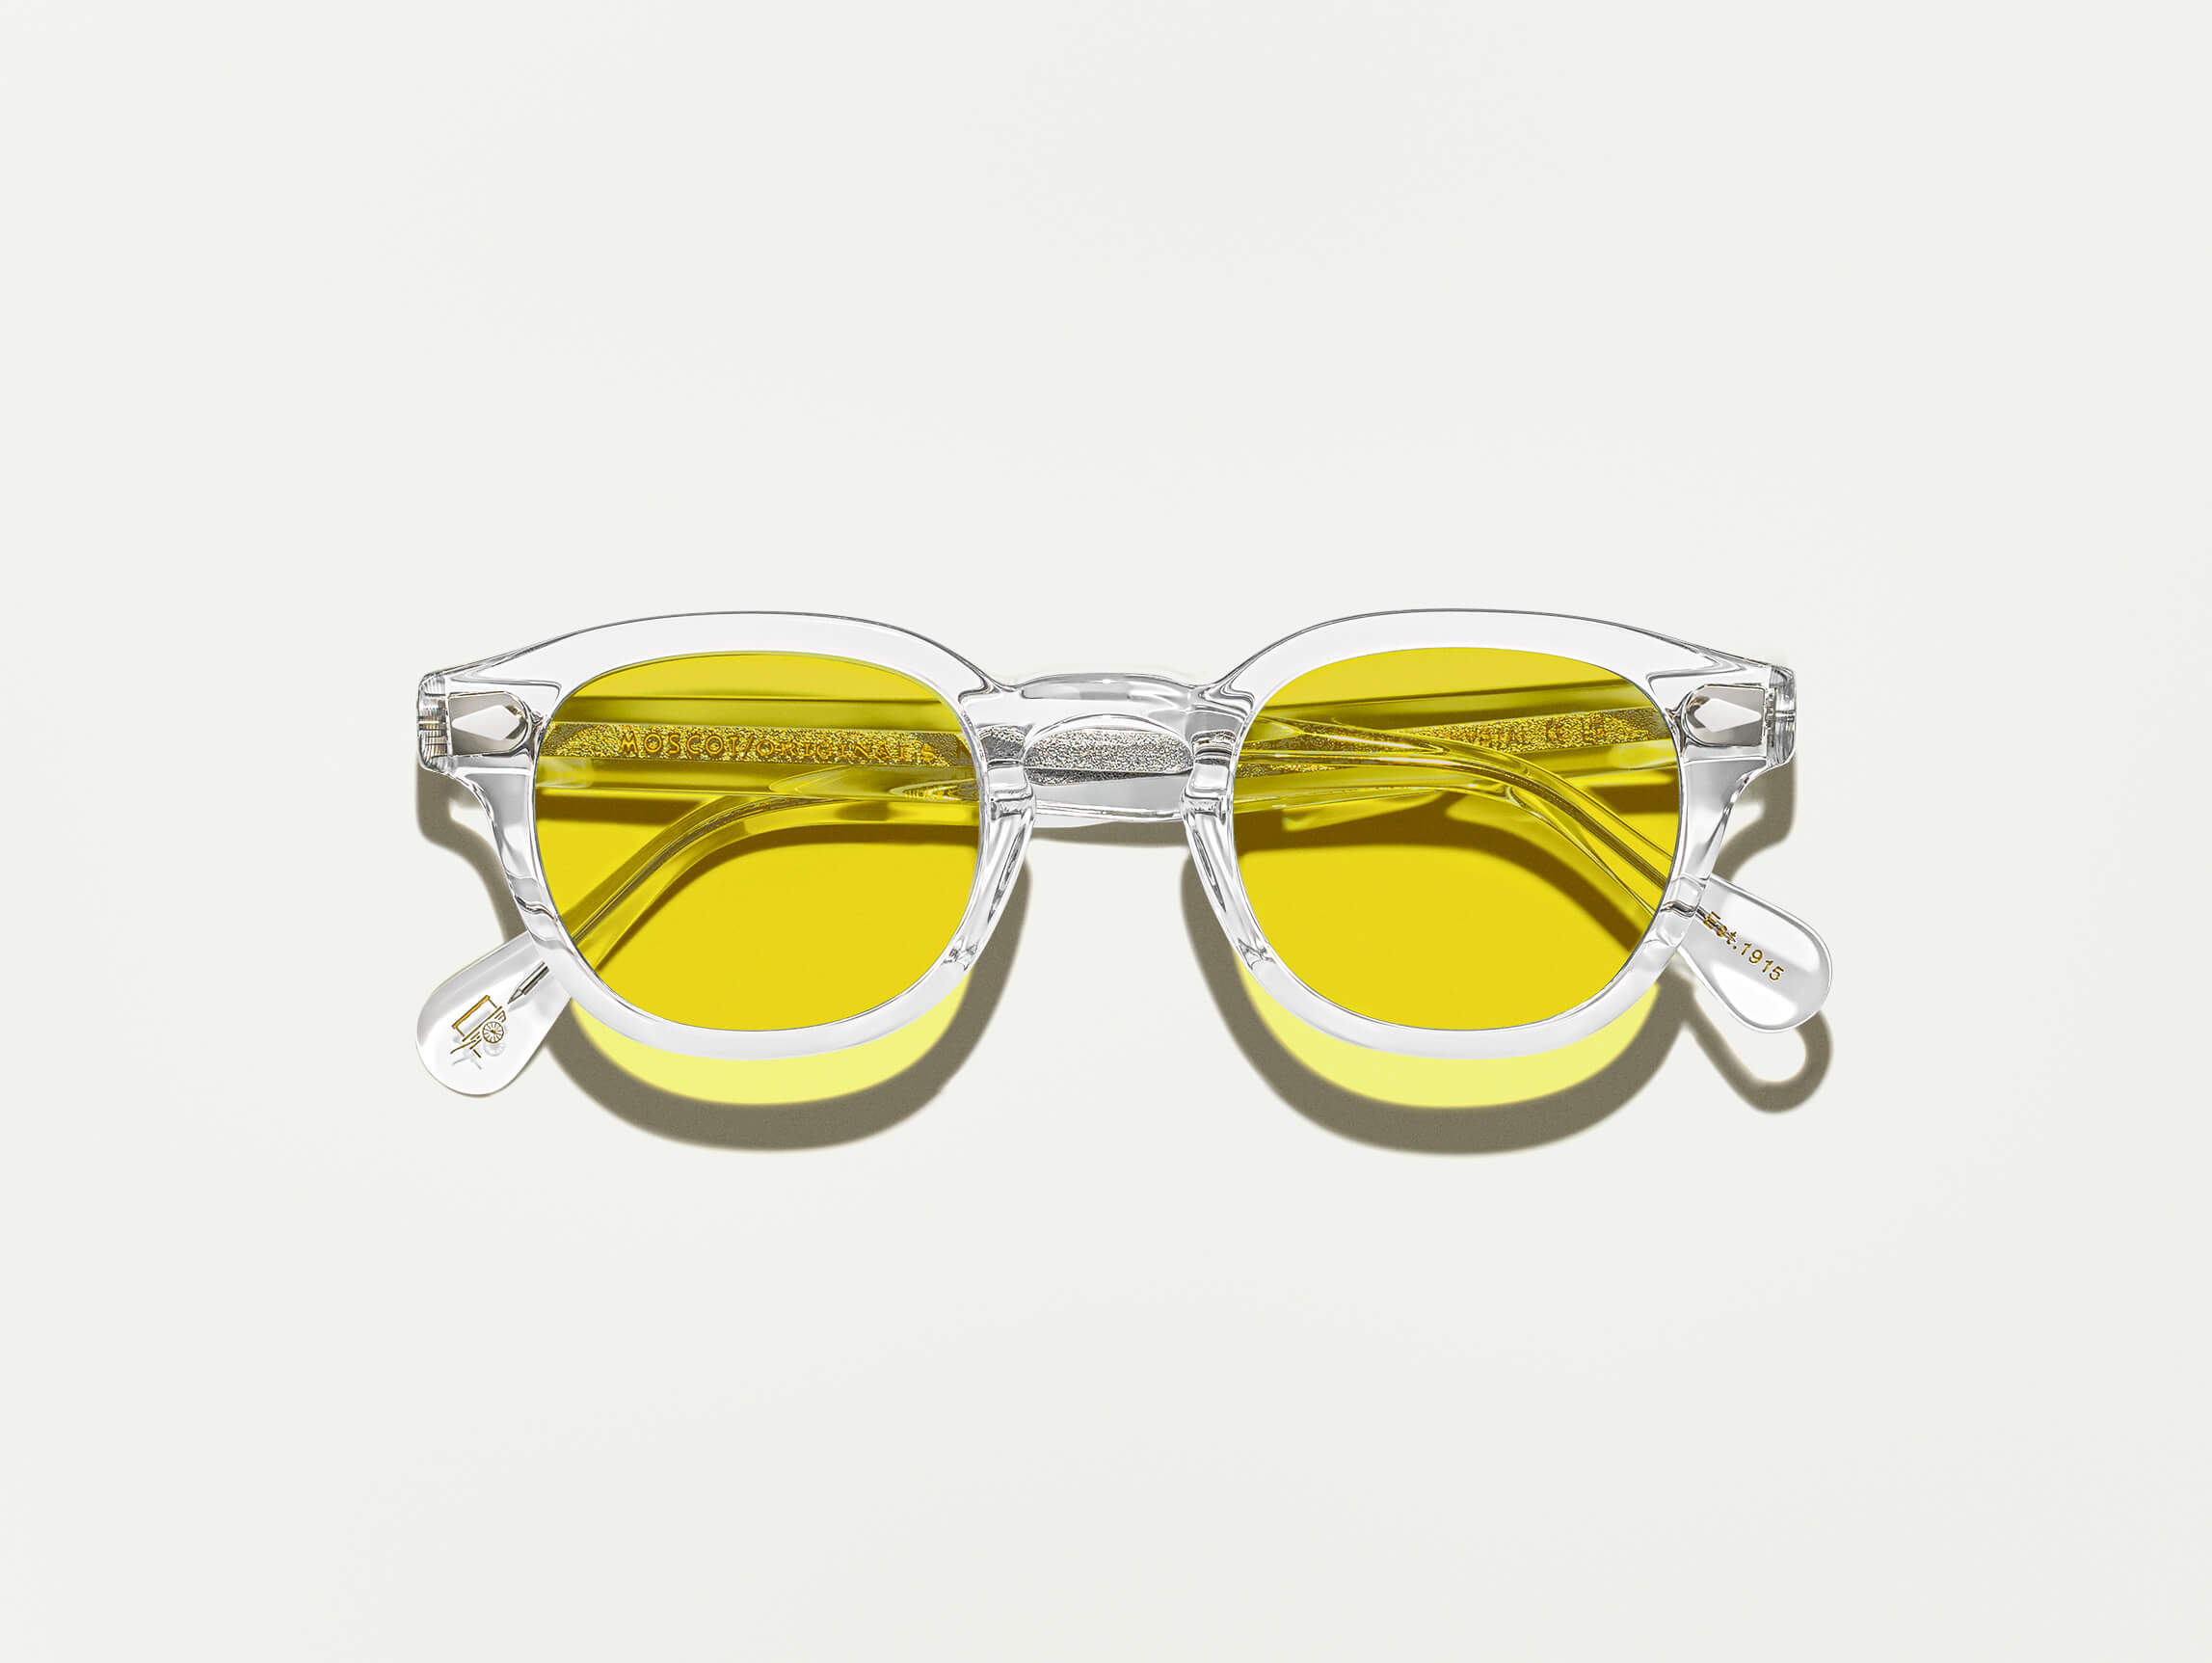 The LEMTOSH Crystal with Mellow Yellow Tinted Lenses